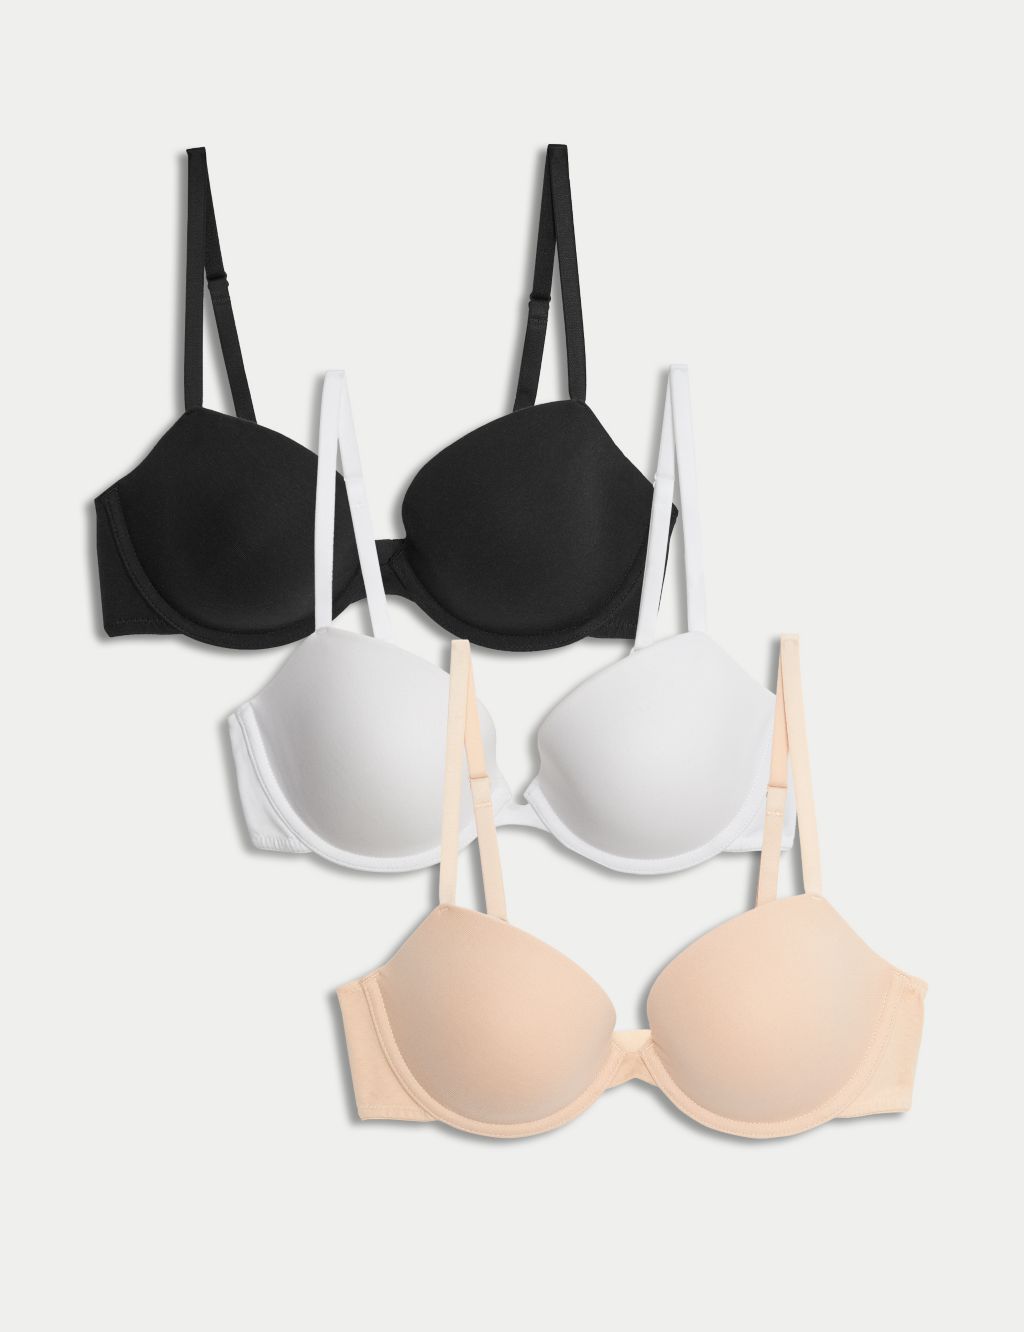 Buy Cotton Blend Bras 3 Pack from the Laura Ashley online shop